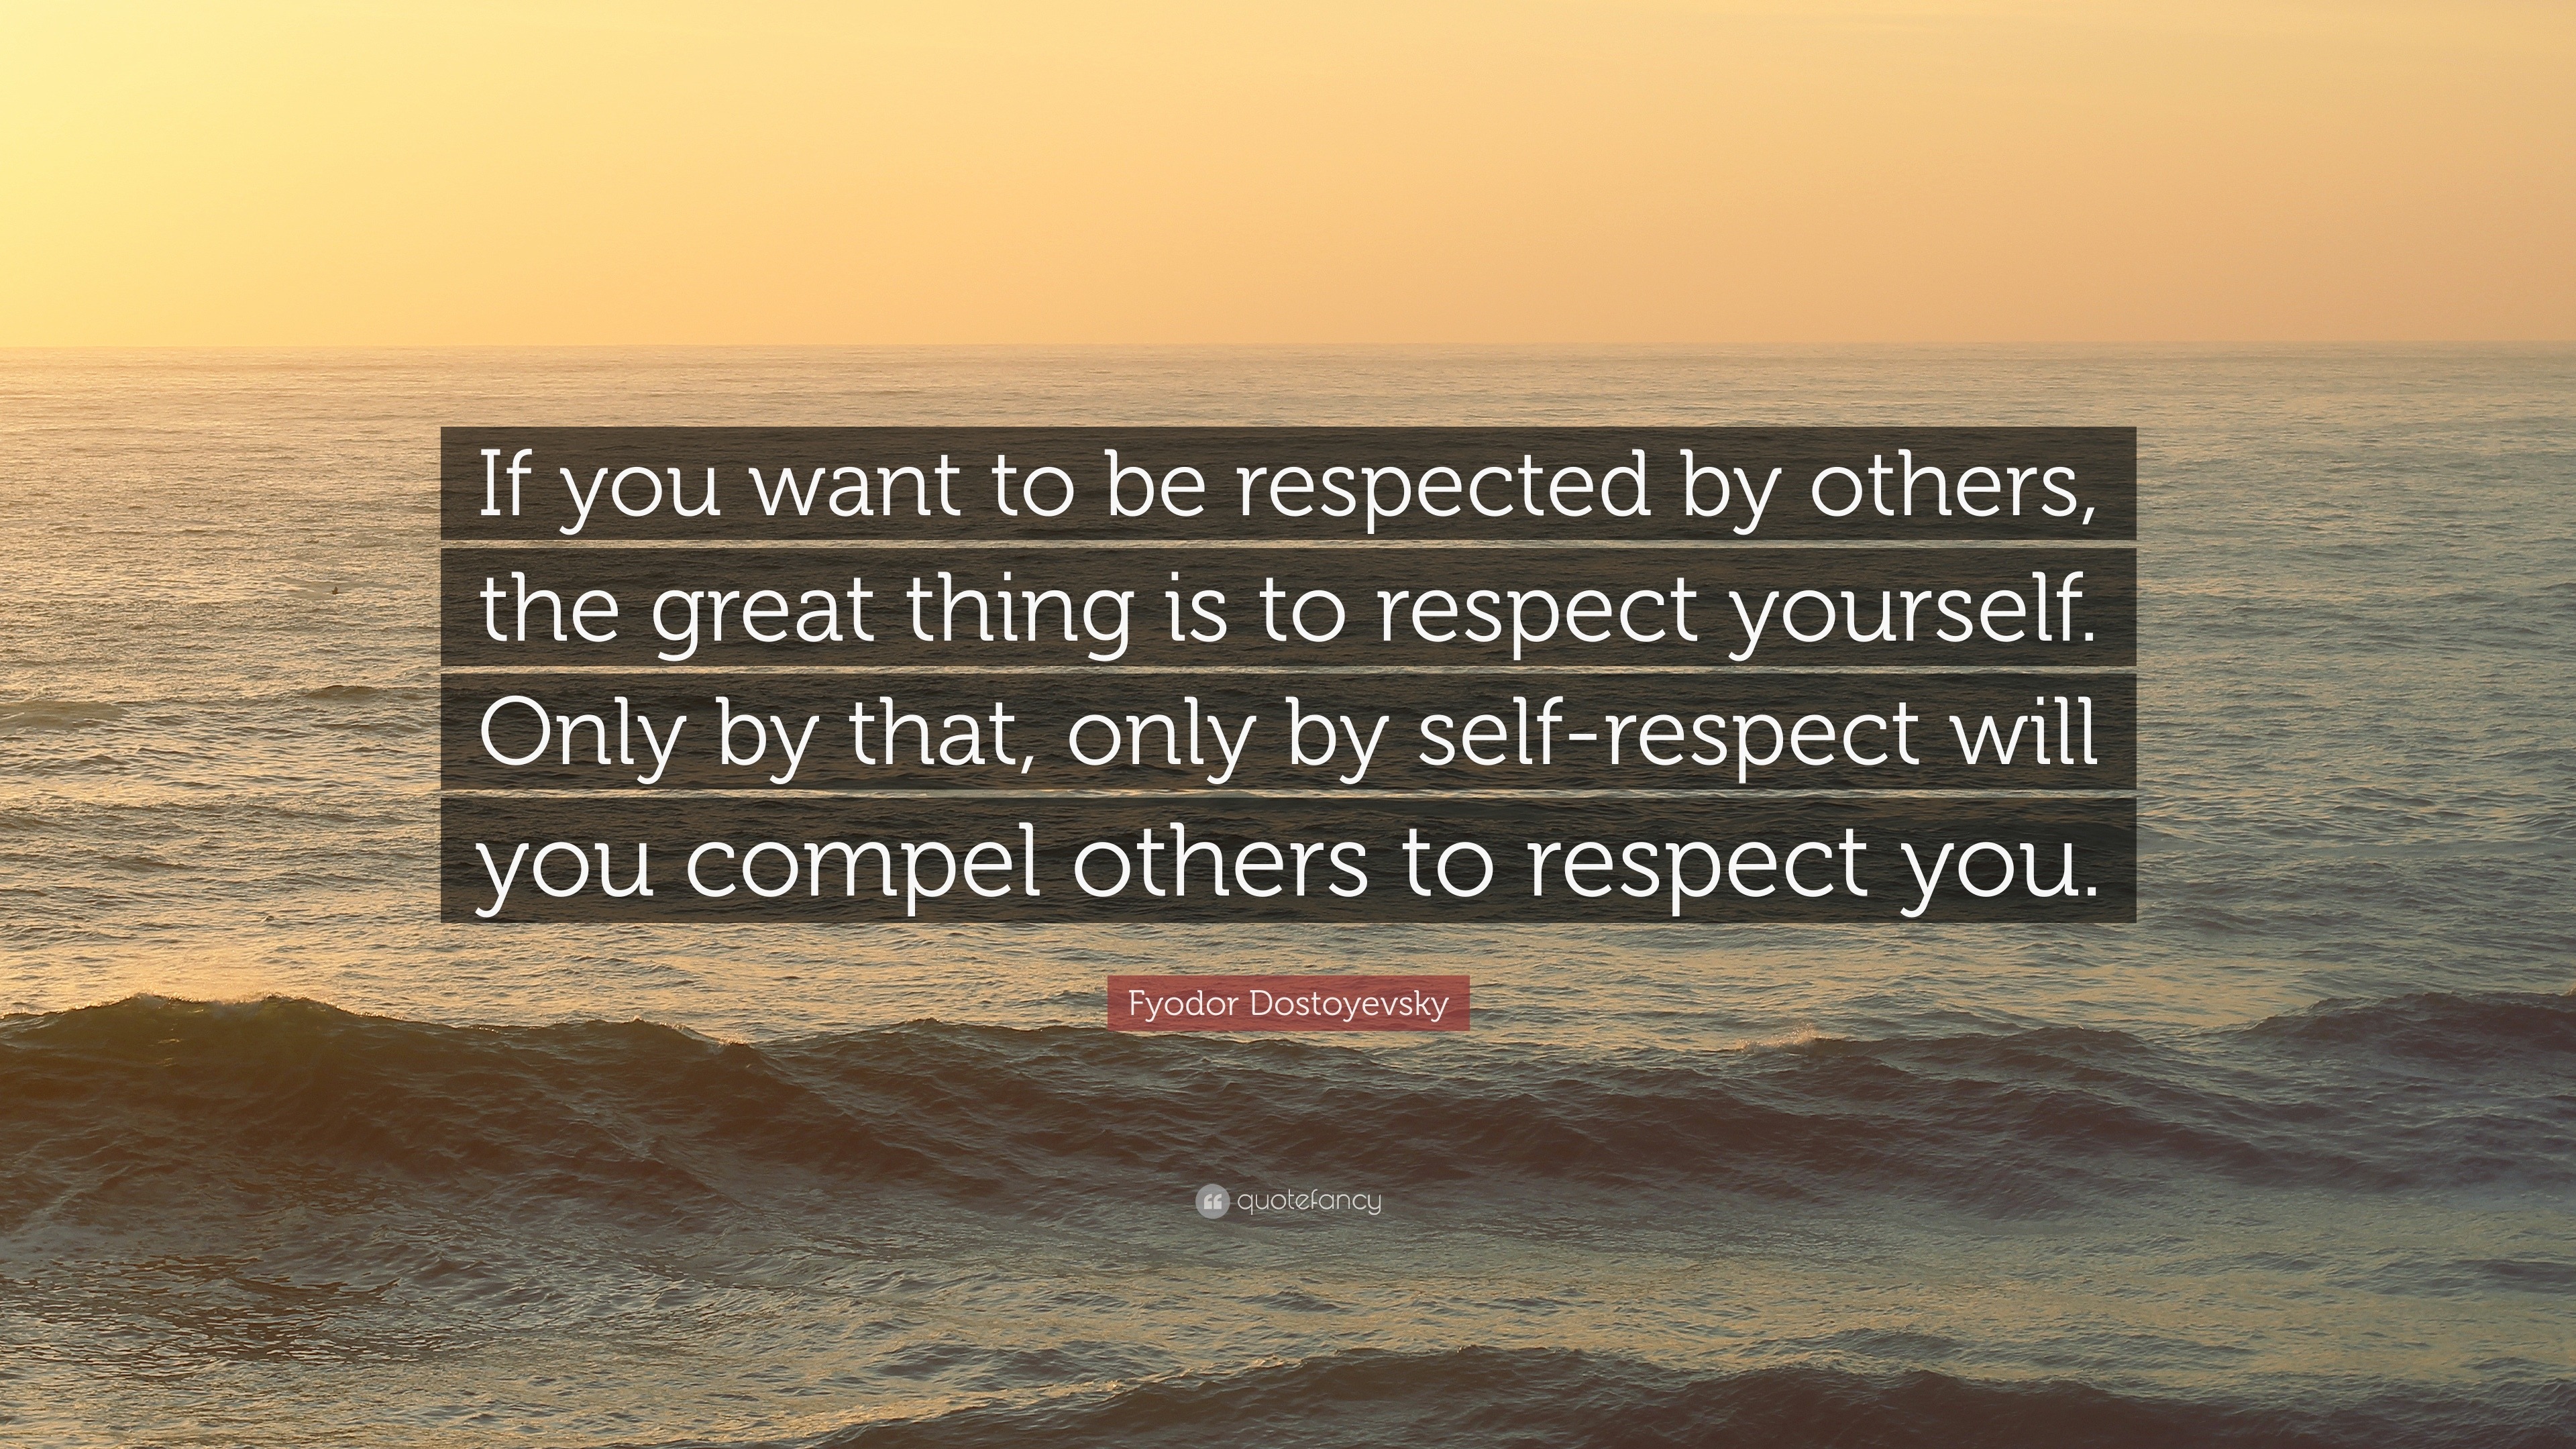 Fyodor Dostoyevsky Quote: “If you want to be respected by others, the